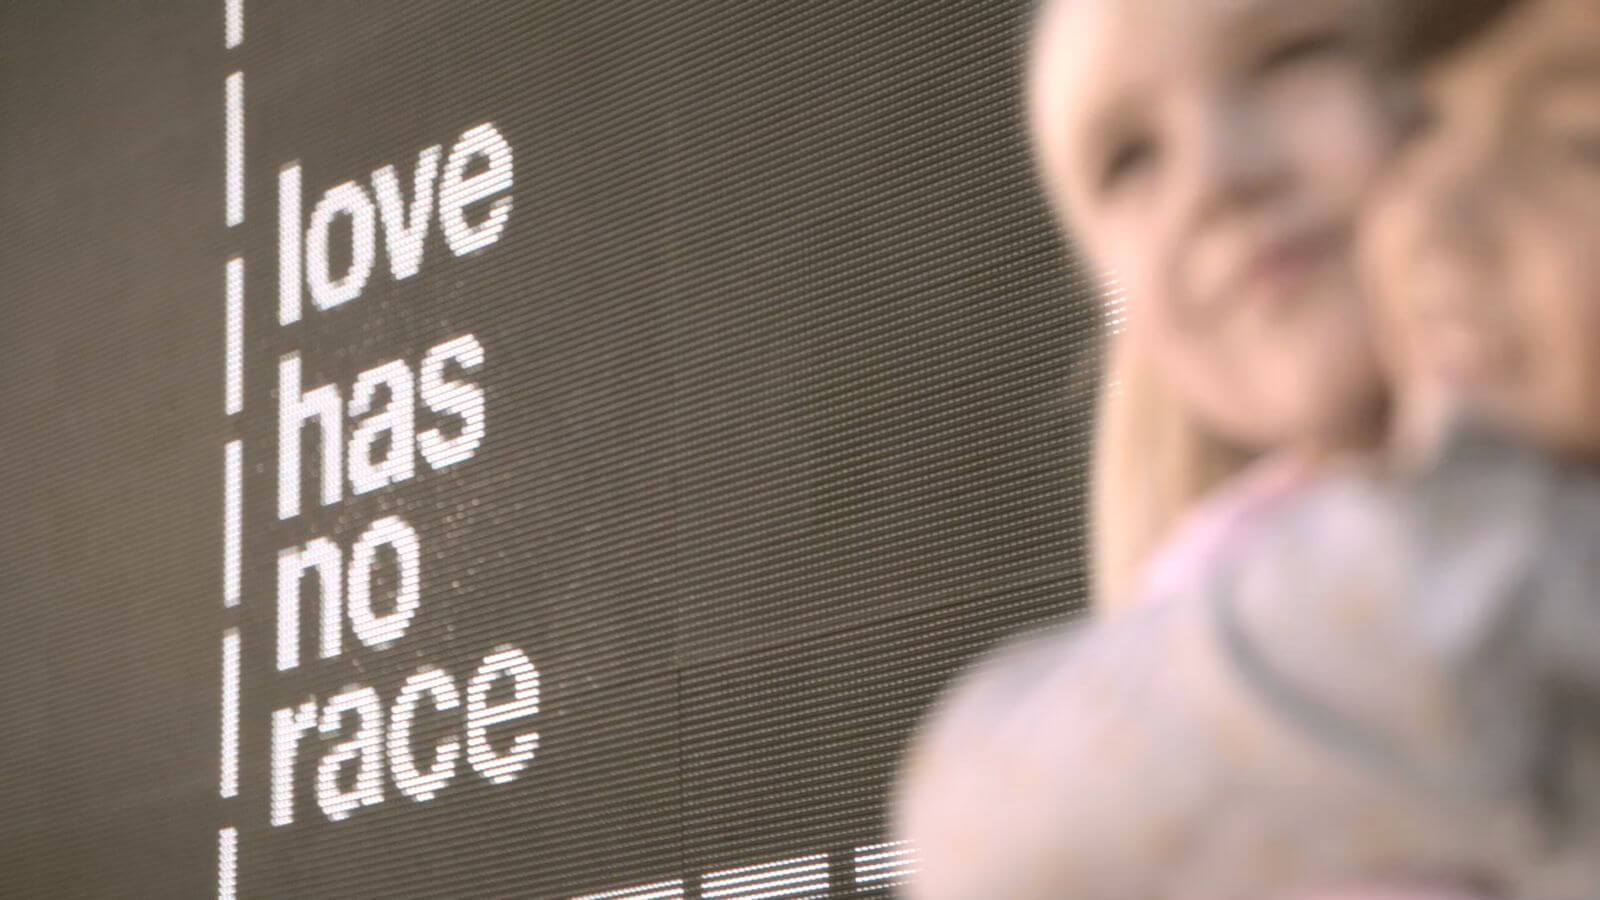 Blurred image of two children hugging next to digital sign that reads 